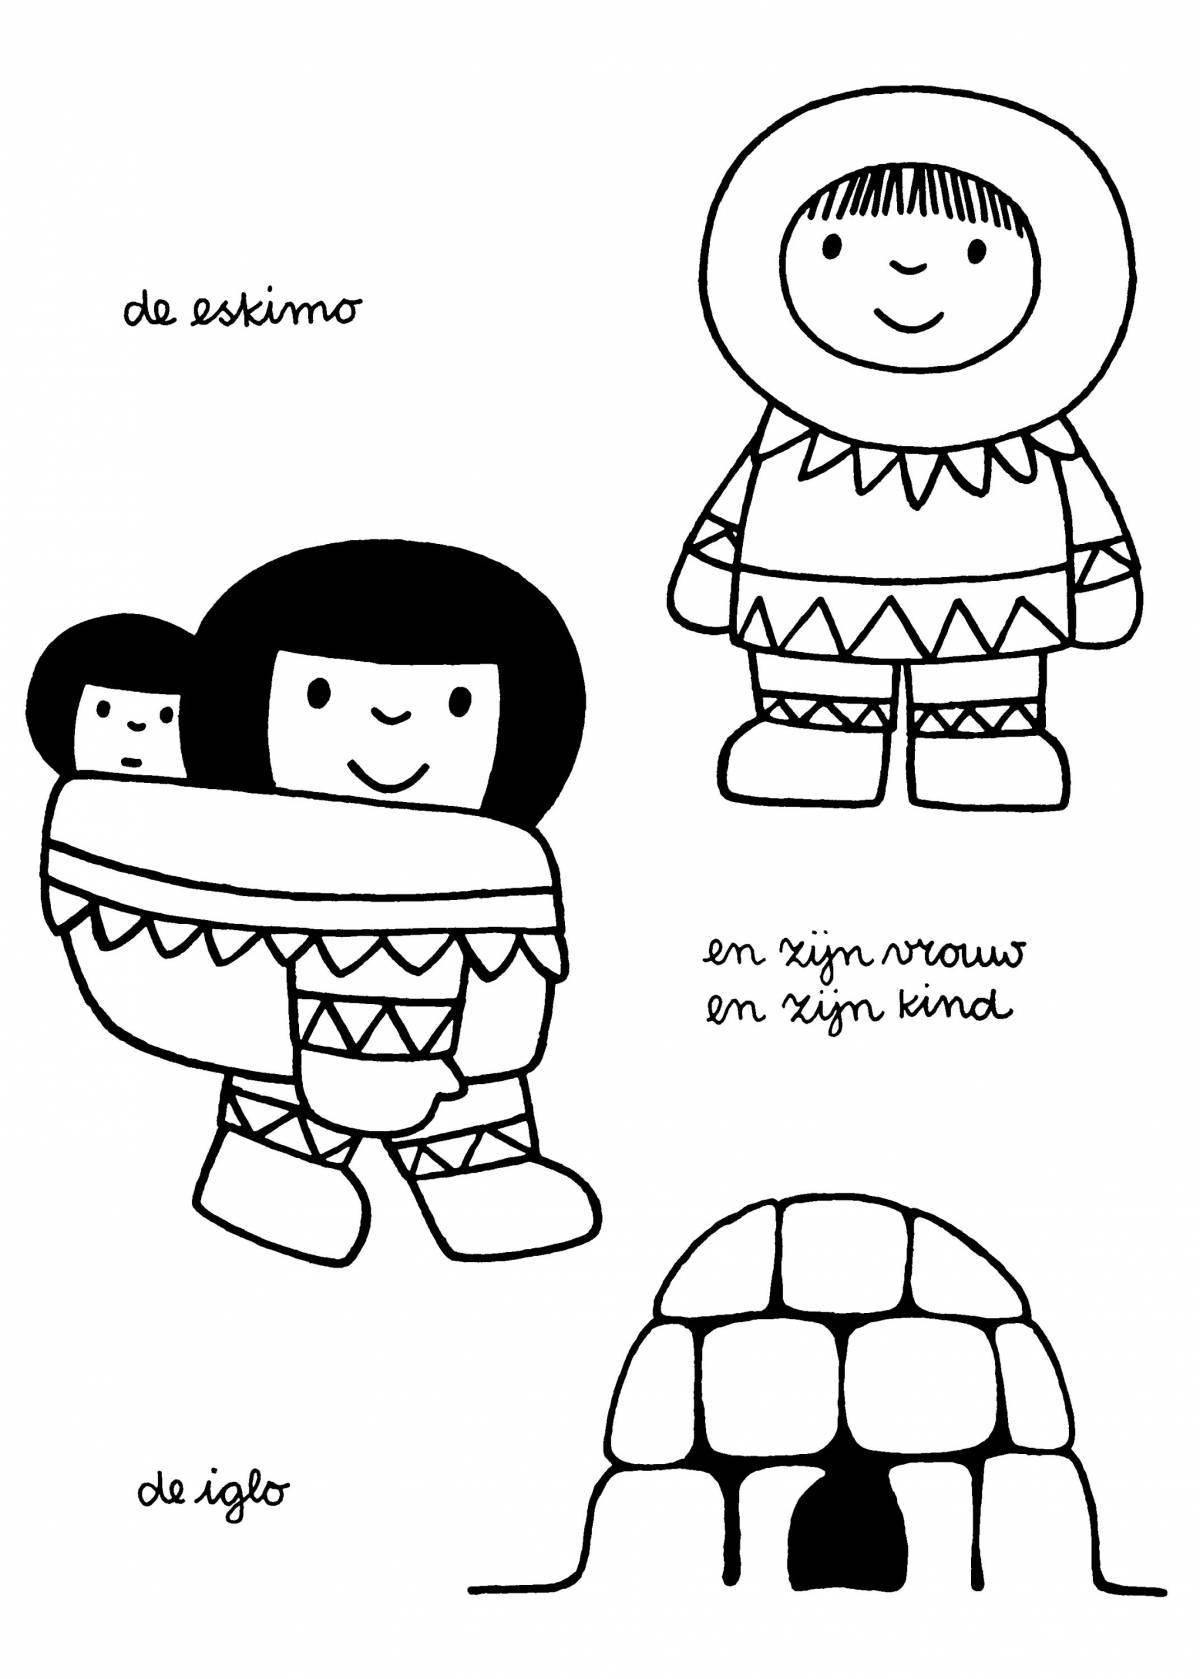 Colorful eskimo children's coloring pages